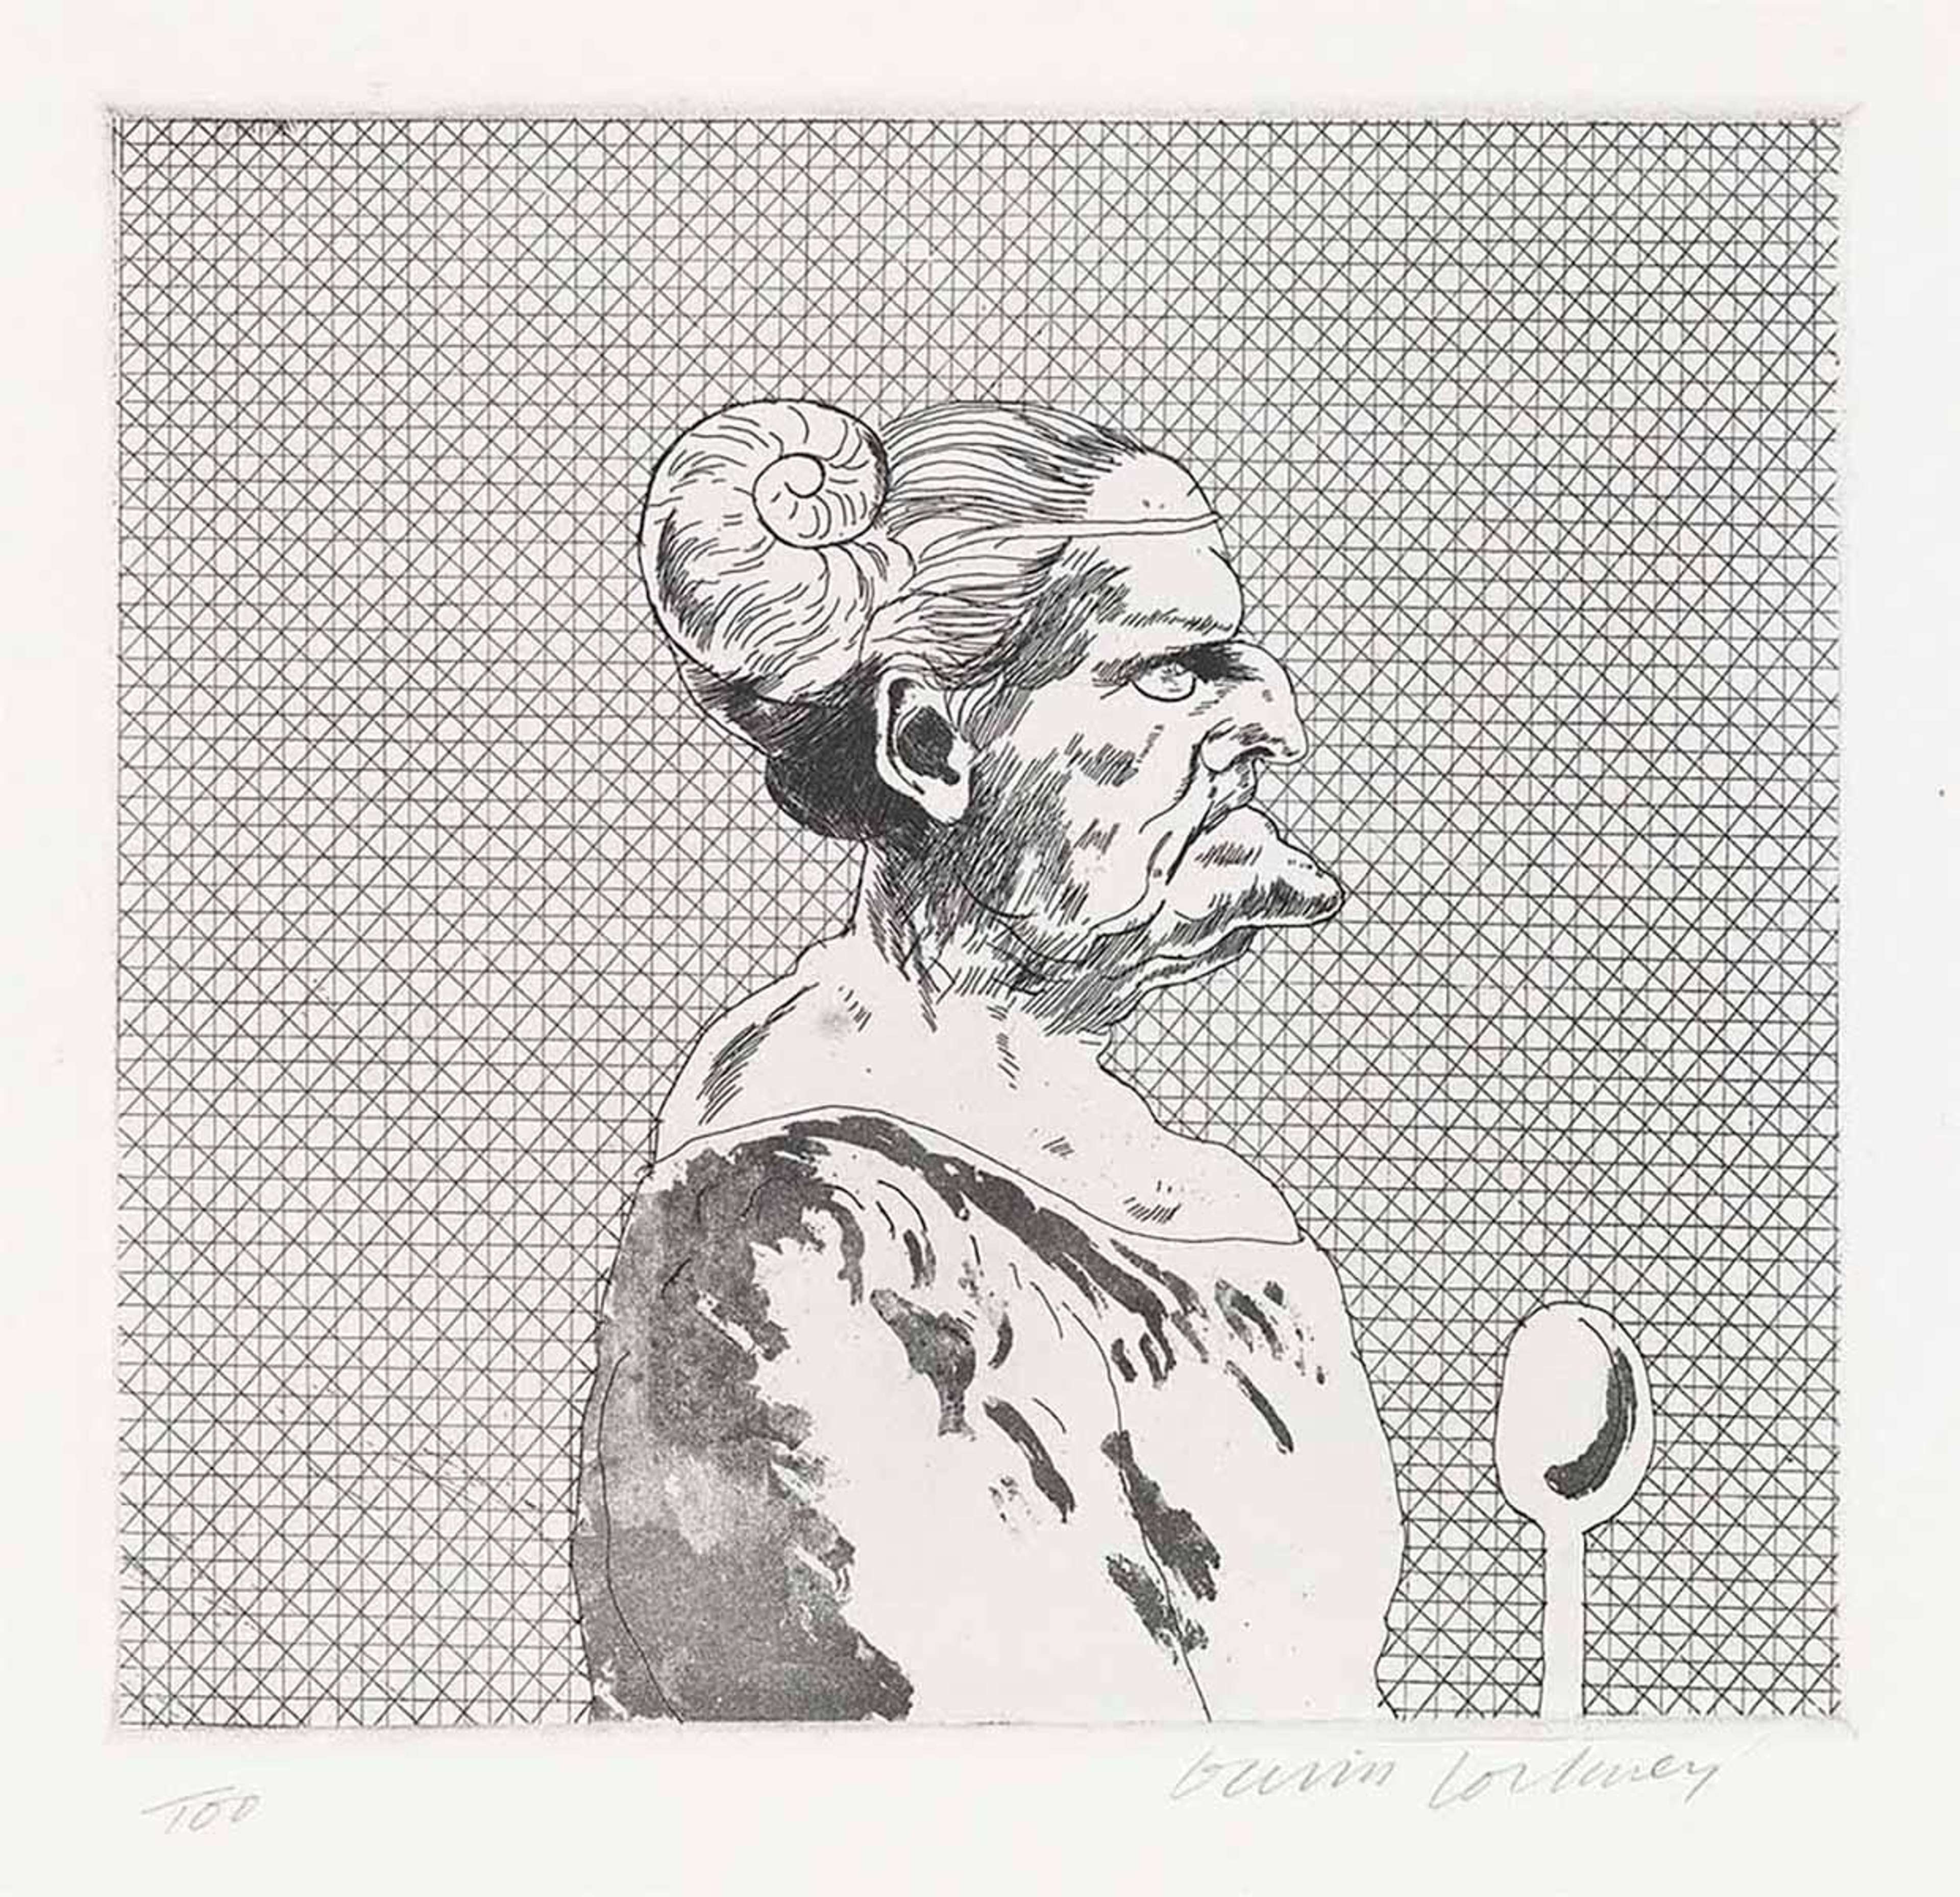 David Hockney’s The Cook. An etching of the side profile of a woman with a protruding chin, holding a wooden spoon.